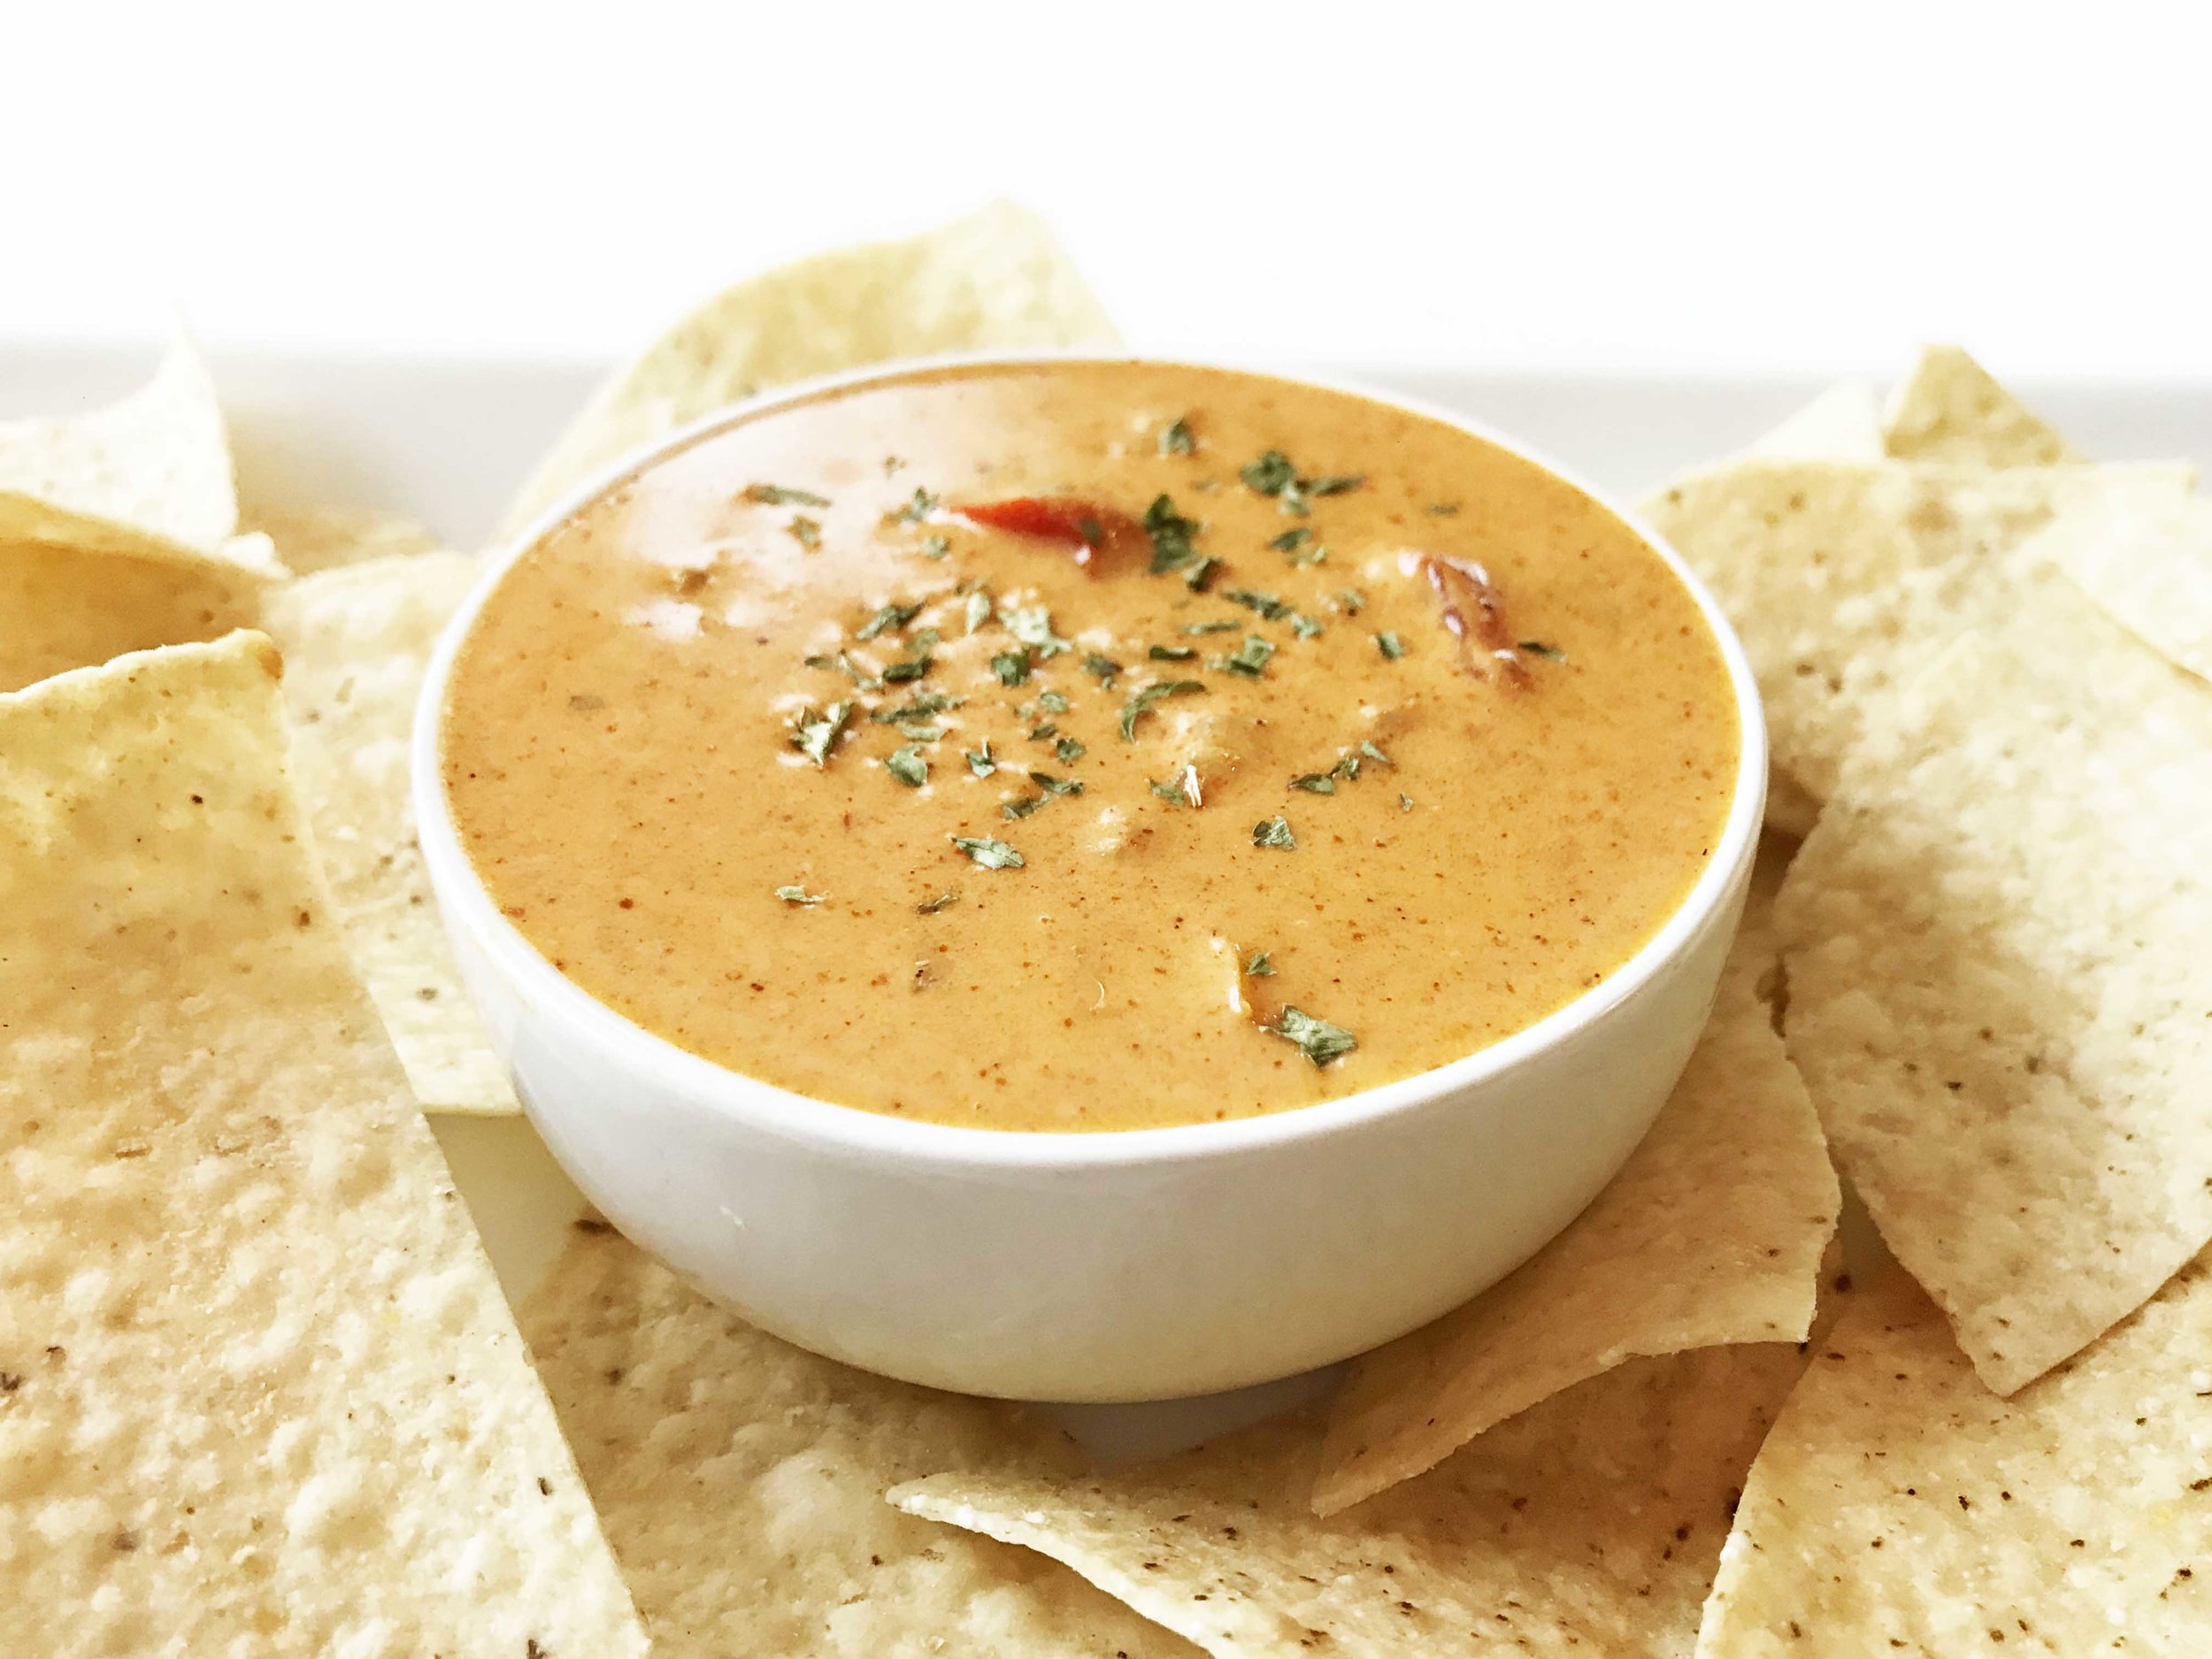 Copycat Dairy-Free Chili's Queso - The Defined Dish